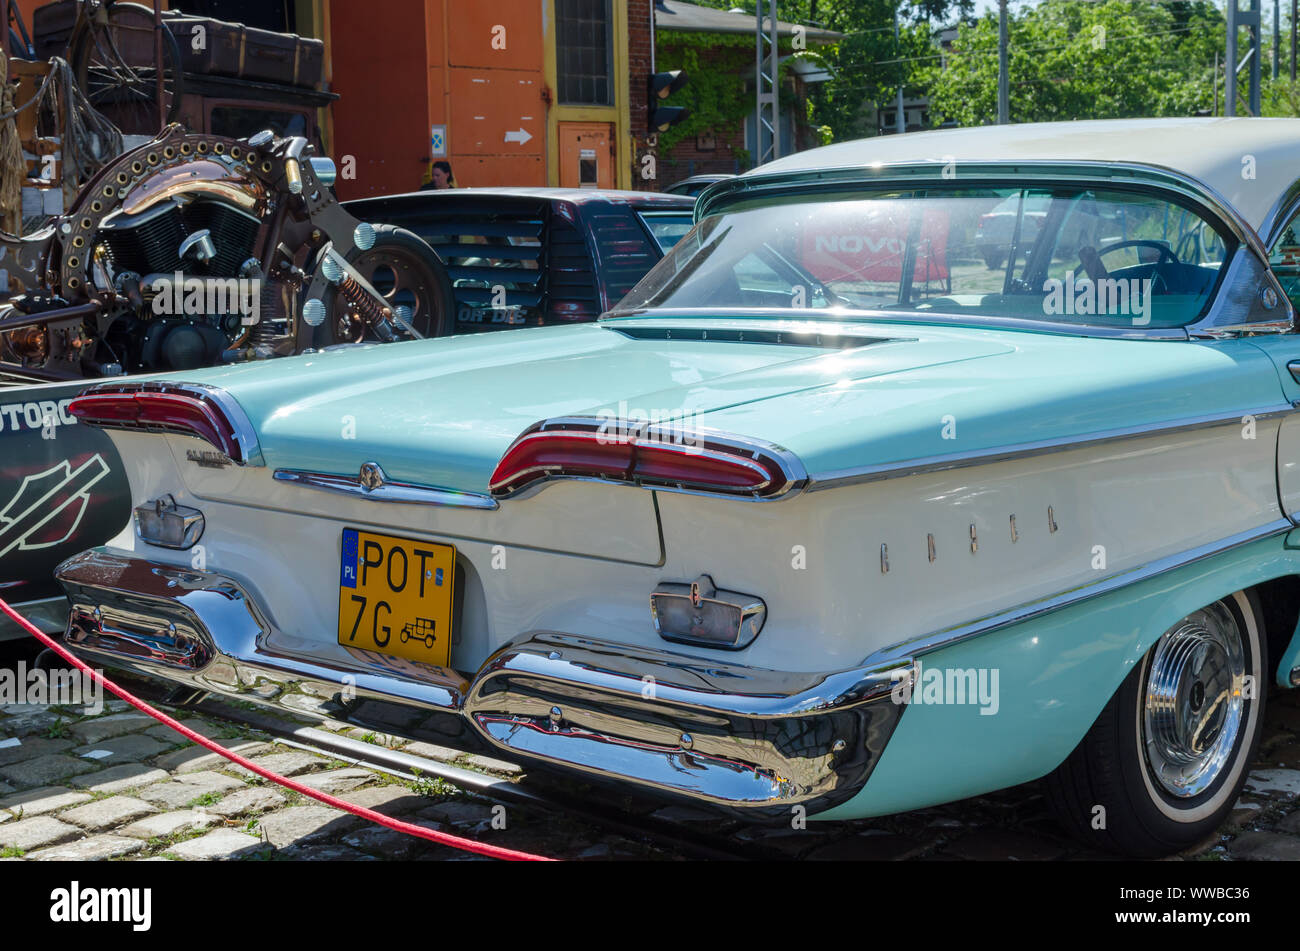 WROCLAW, POLAND - August 11, 2019: USA cars show - Edsel Pacer 1958 Stock Photo